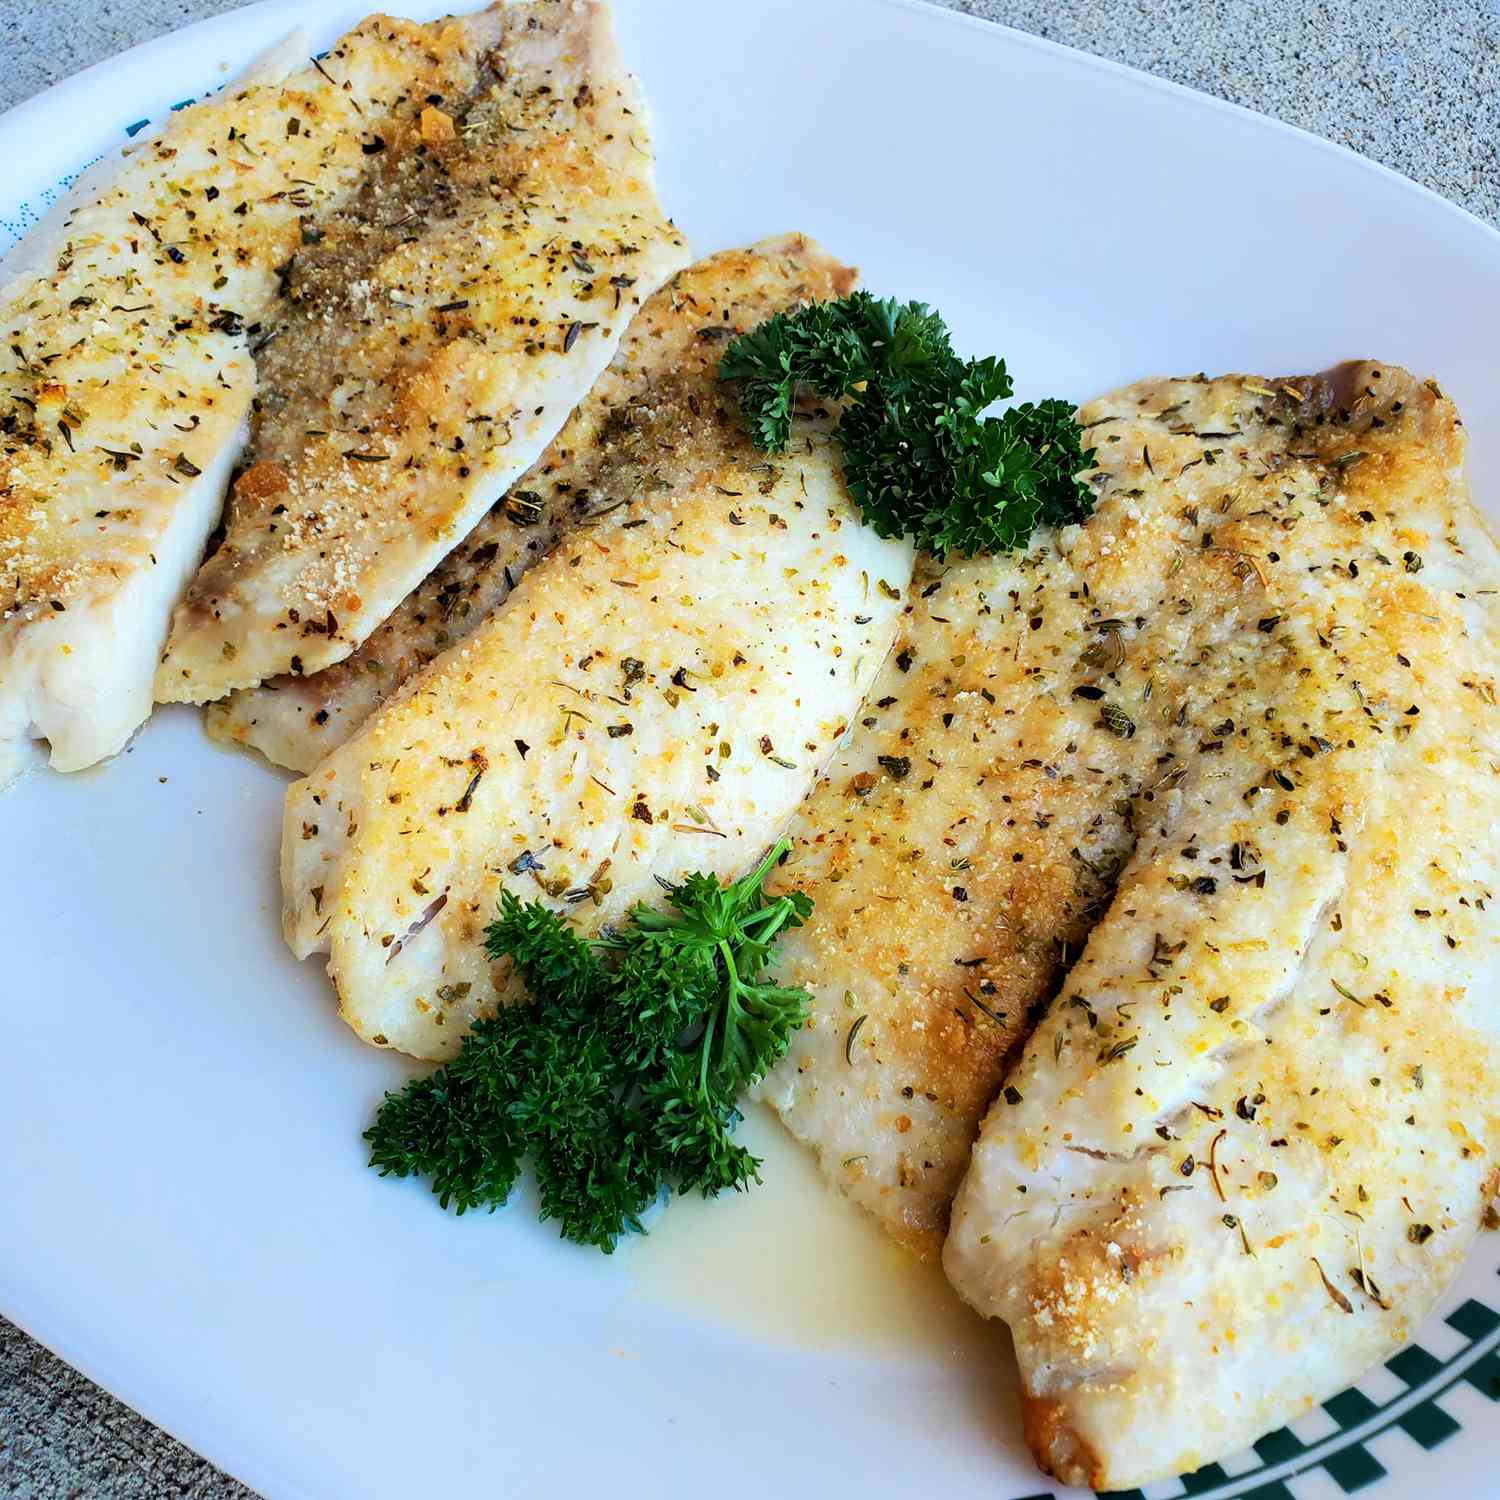 Baked Flounder Recipe: A Delicious and Healthy Seafood Dish